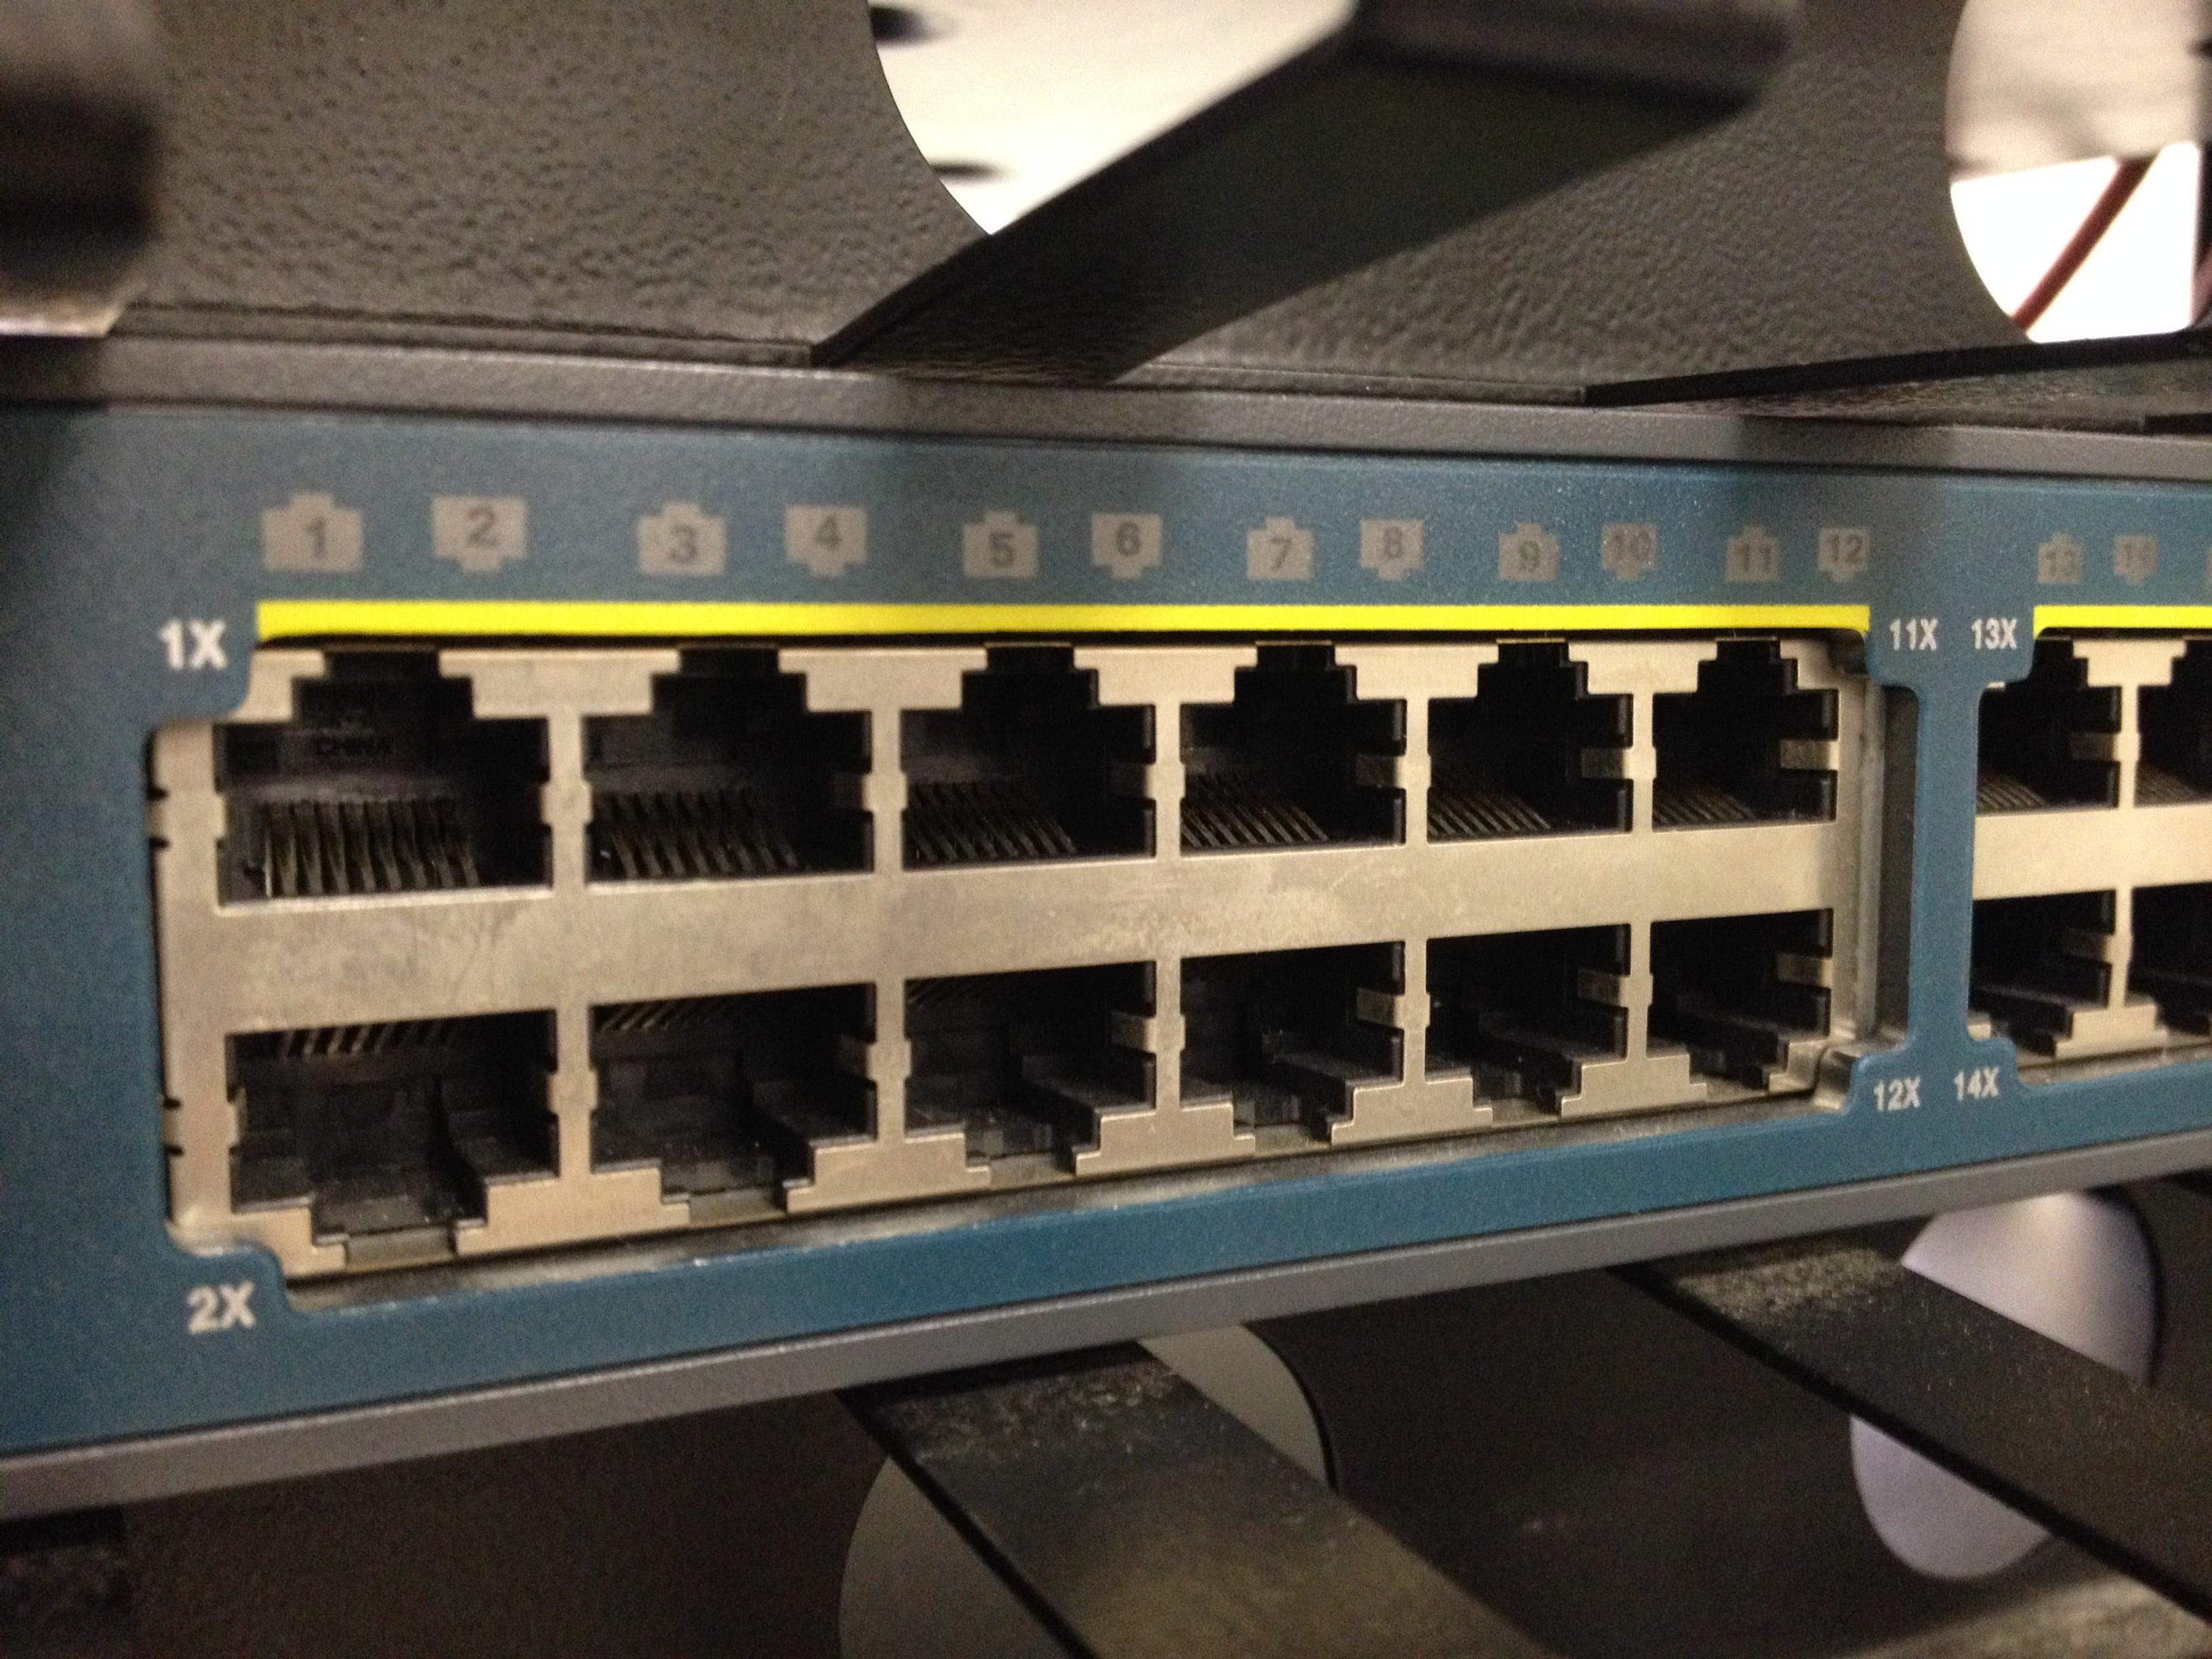 Detail of the ports of a Cisco Catalyst switch